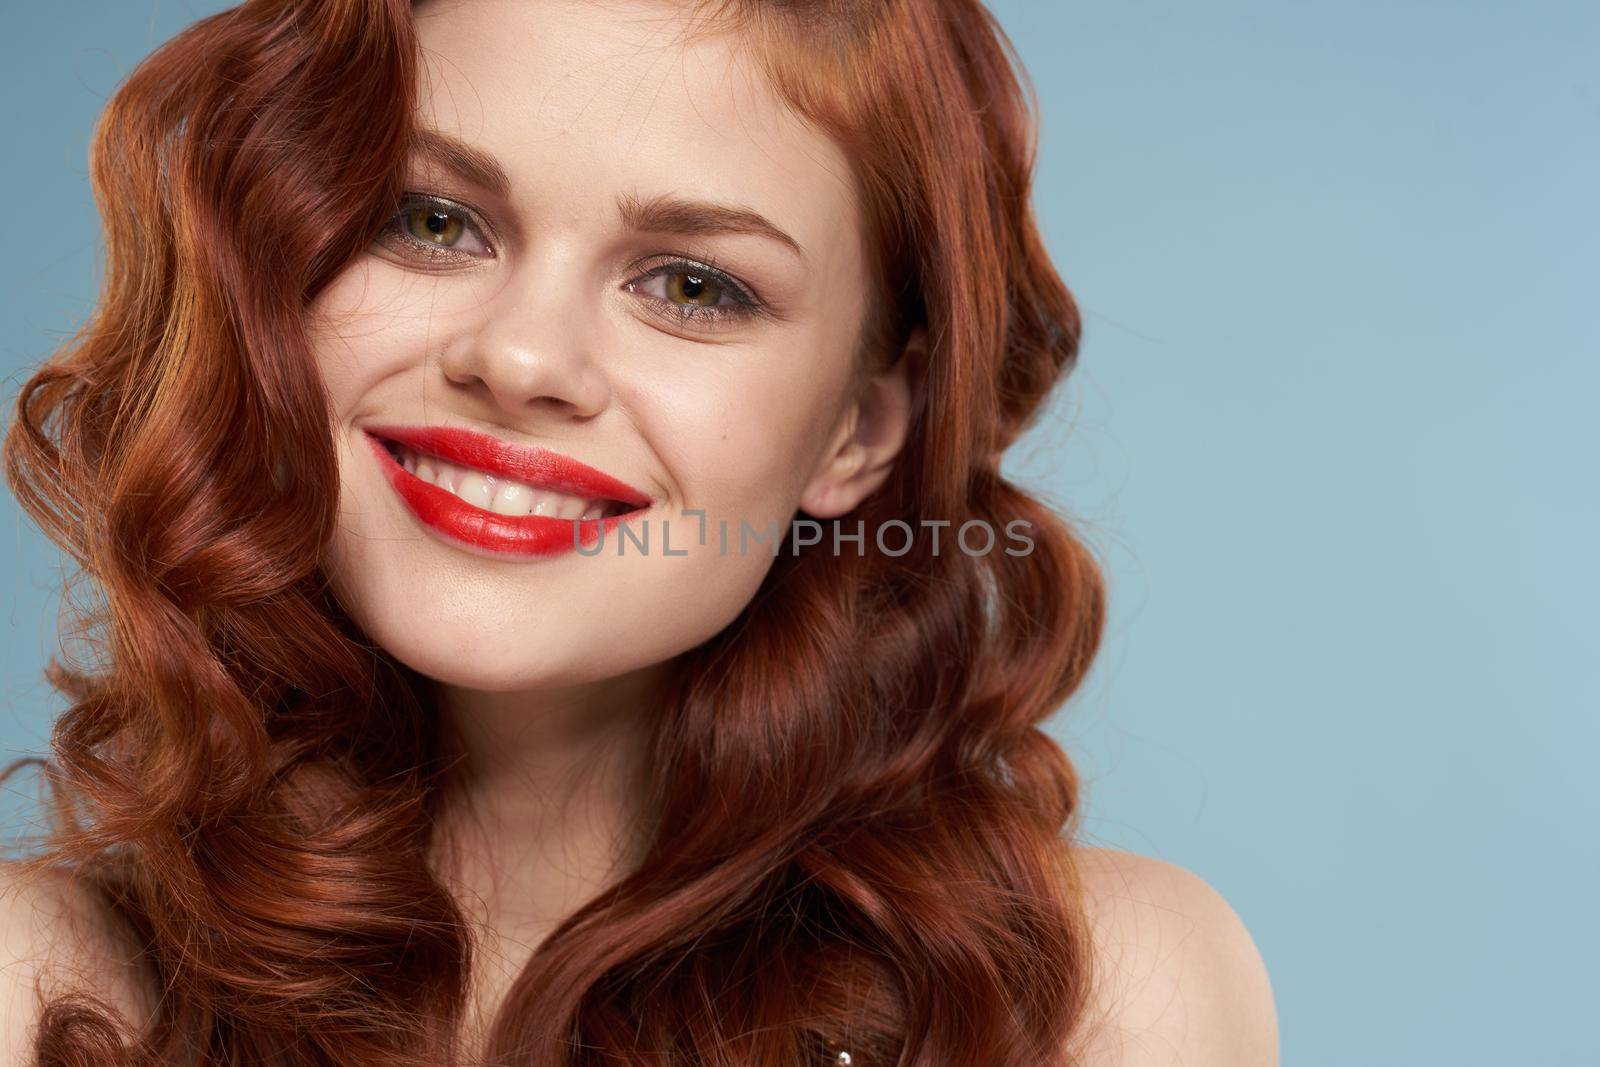 attractive red-haired woman red lips face close up. High quality photo